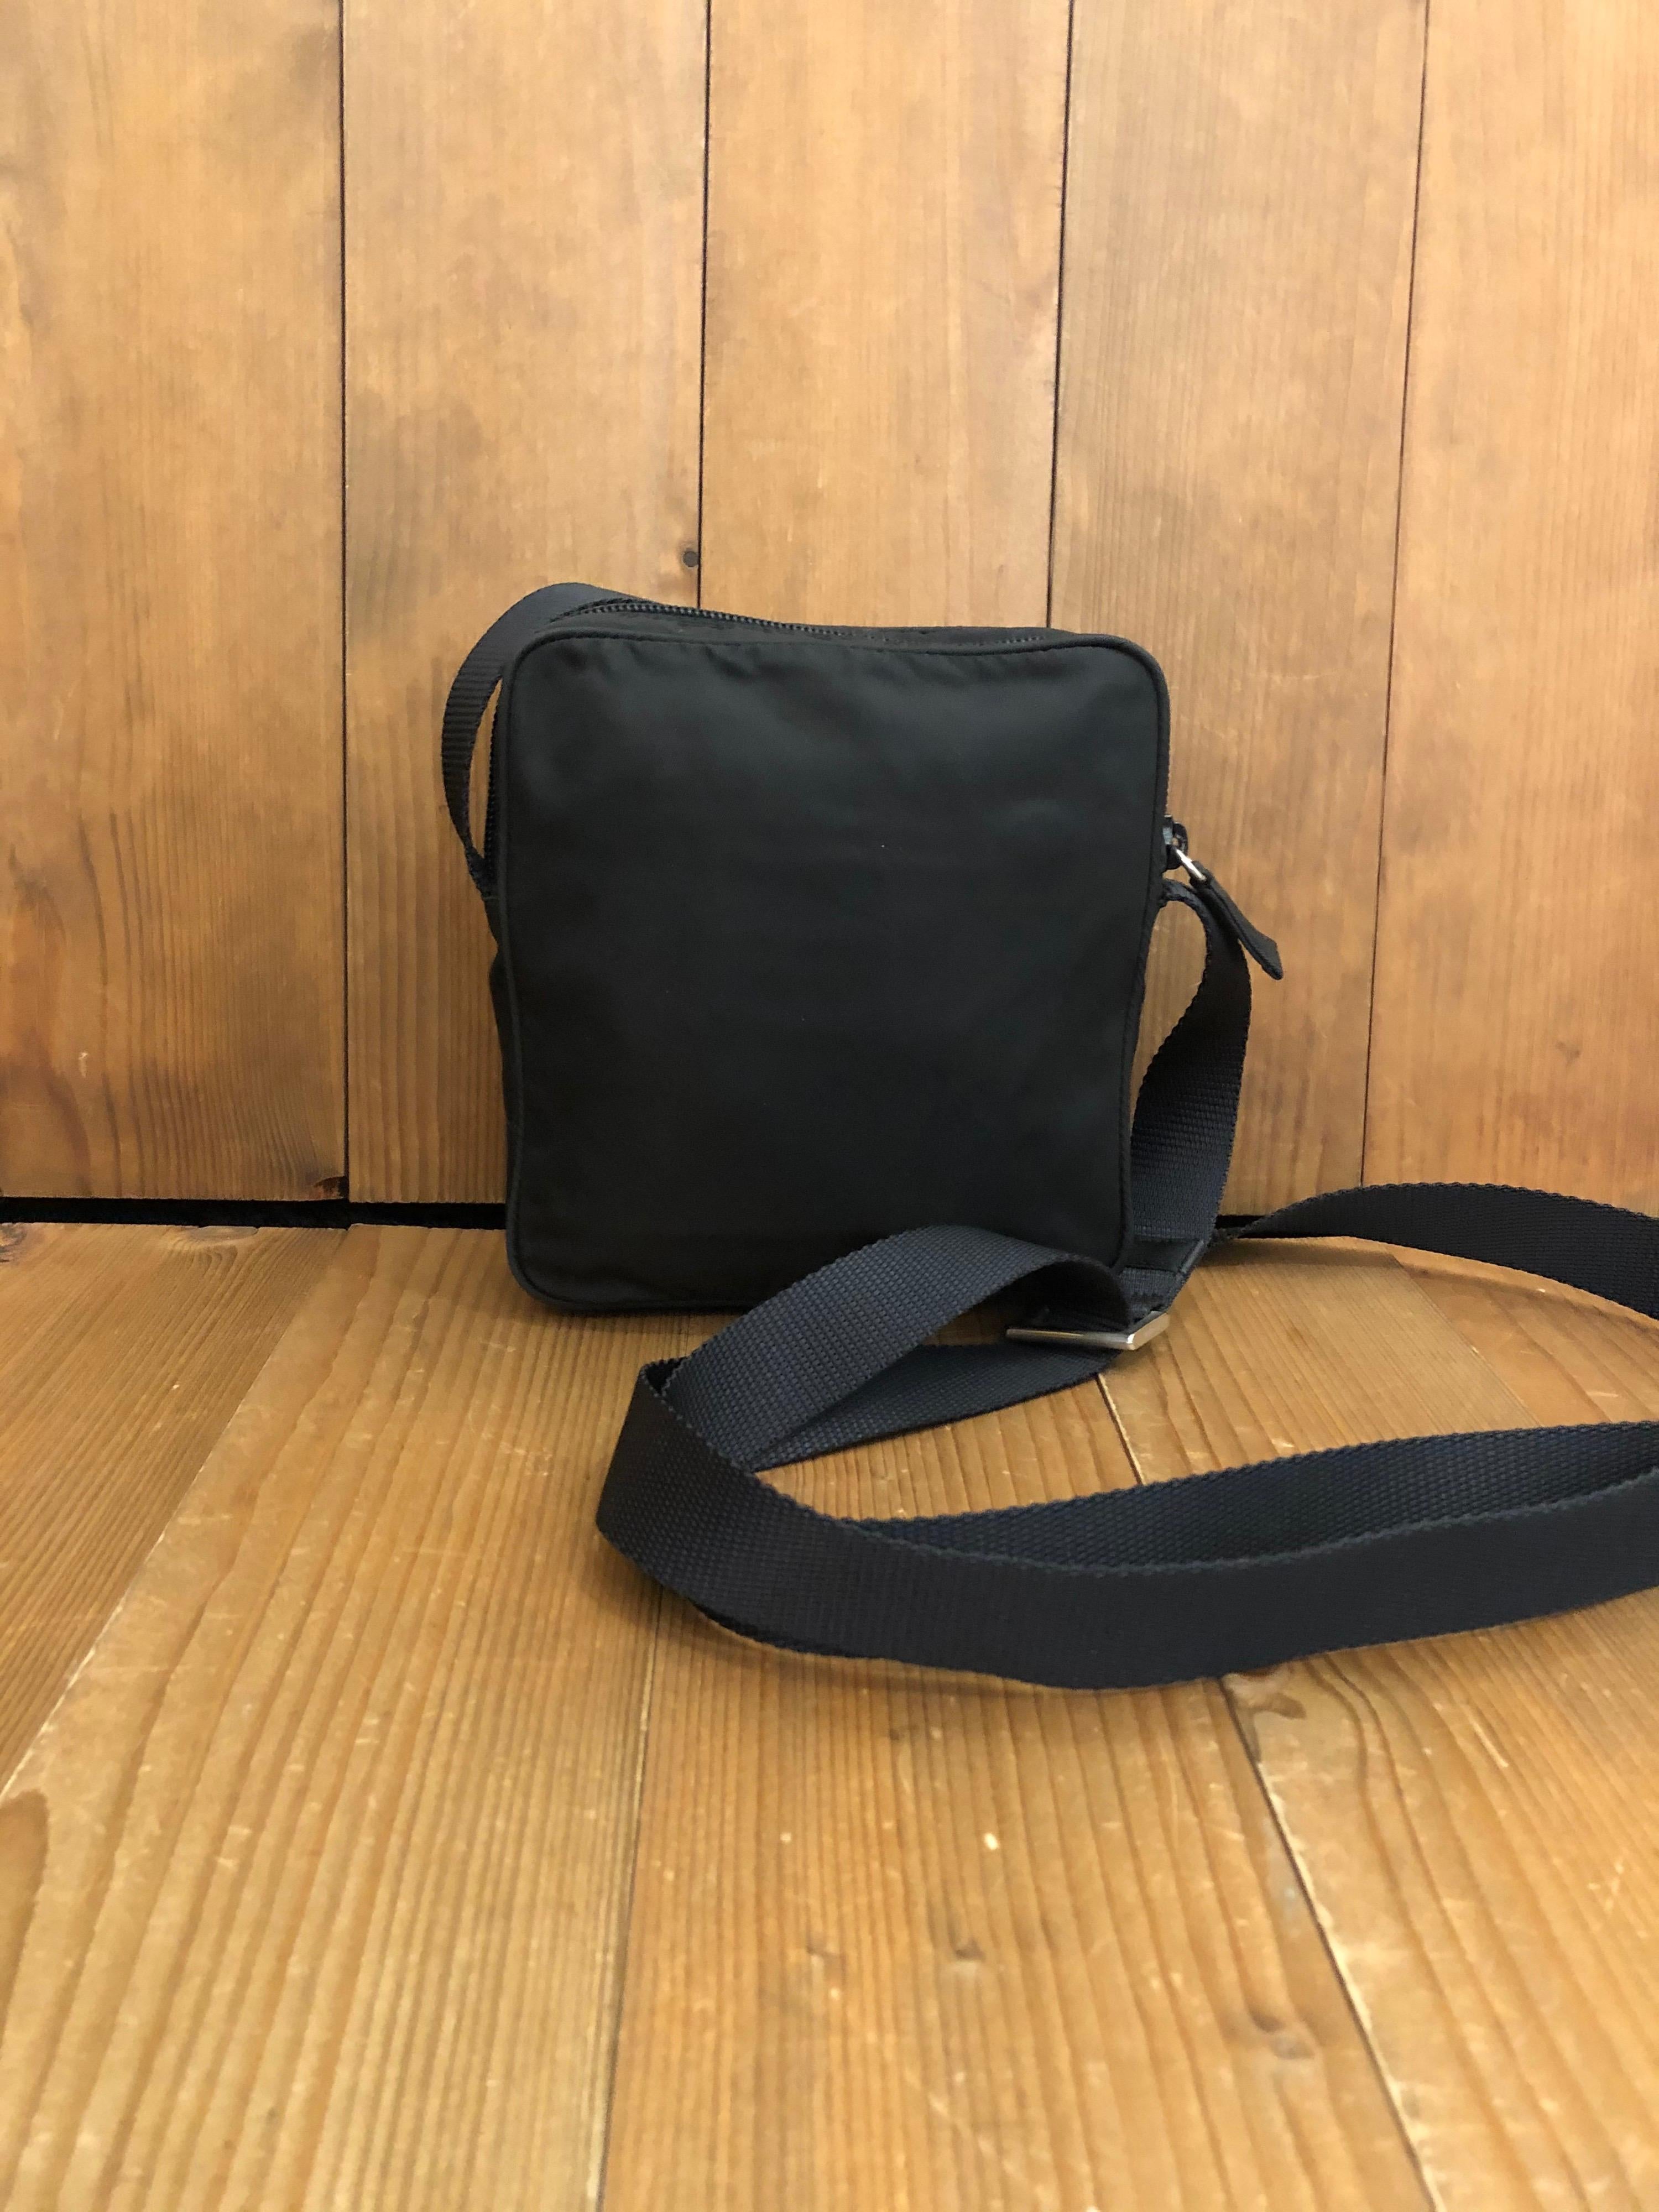 PRADA Black Tessuto Mini Crossbody Bag Unisex
Material: Polyester
Color: Black
Origin: Italy
Measurements: 5.9”x6.1”x1.5” Drop 28” (at its longest)
Specifications: 1 exterior zip pocket

Condition:
Outside: Minor marks
Inside: Clean
Pockets: